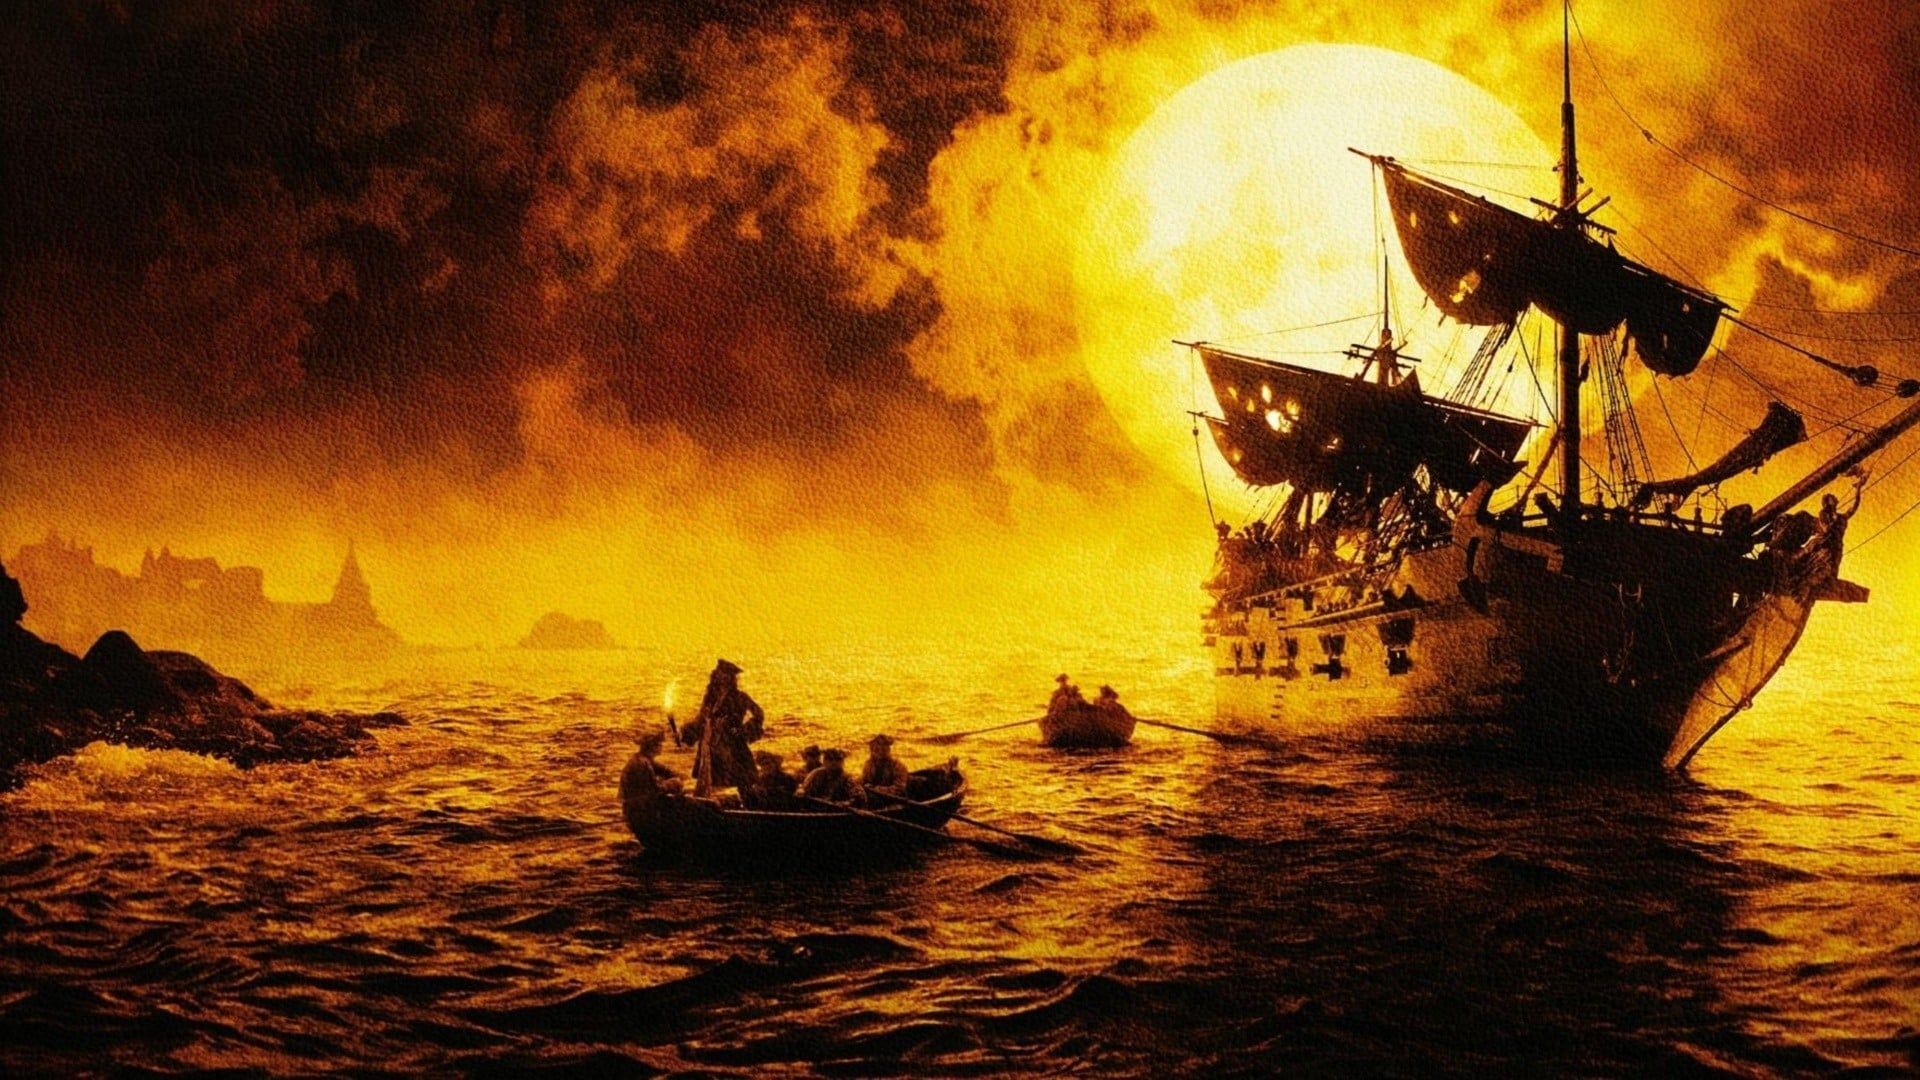 Pirates of the Caribbean: The Curse of the Black Pearl Wallpaper Free Pirates of the Caribbean: The Curse of the Black Pearl Background